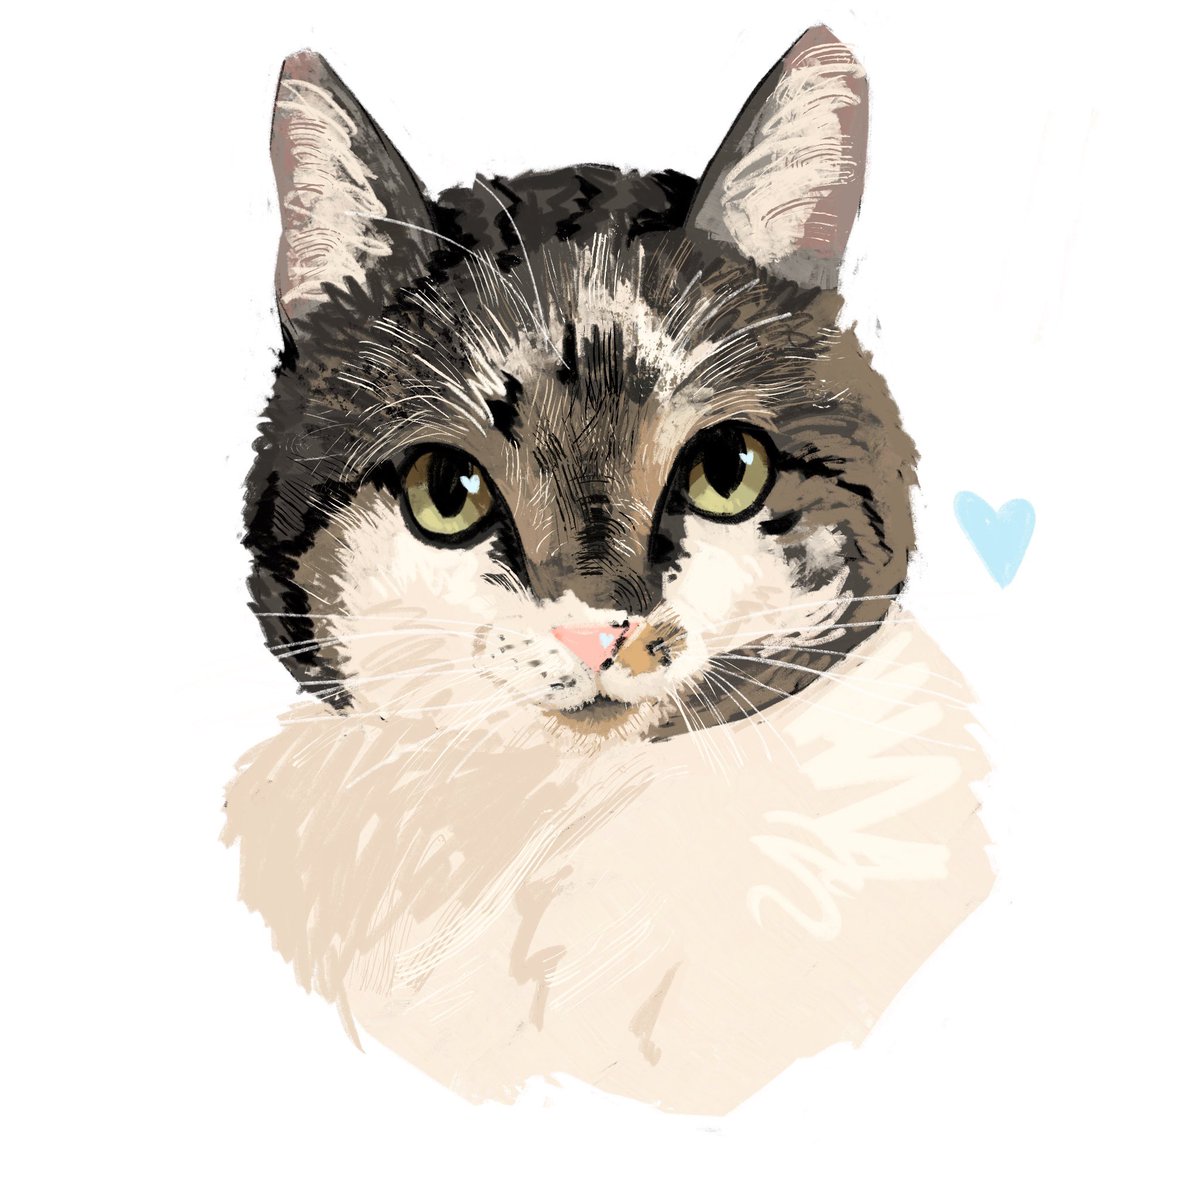 「Pet portraits will be open again in Marc」|🌈⭐Diana TS @ new patreon slots☀️🌈のイラスト